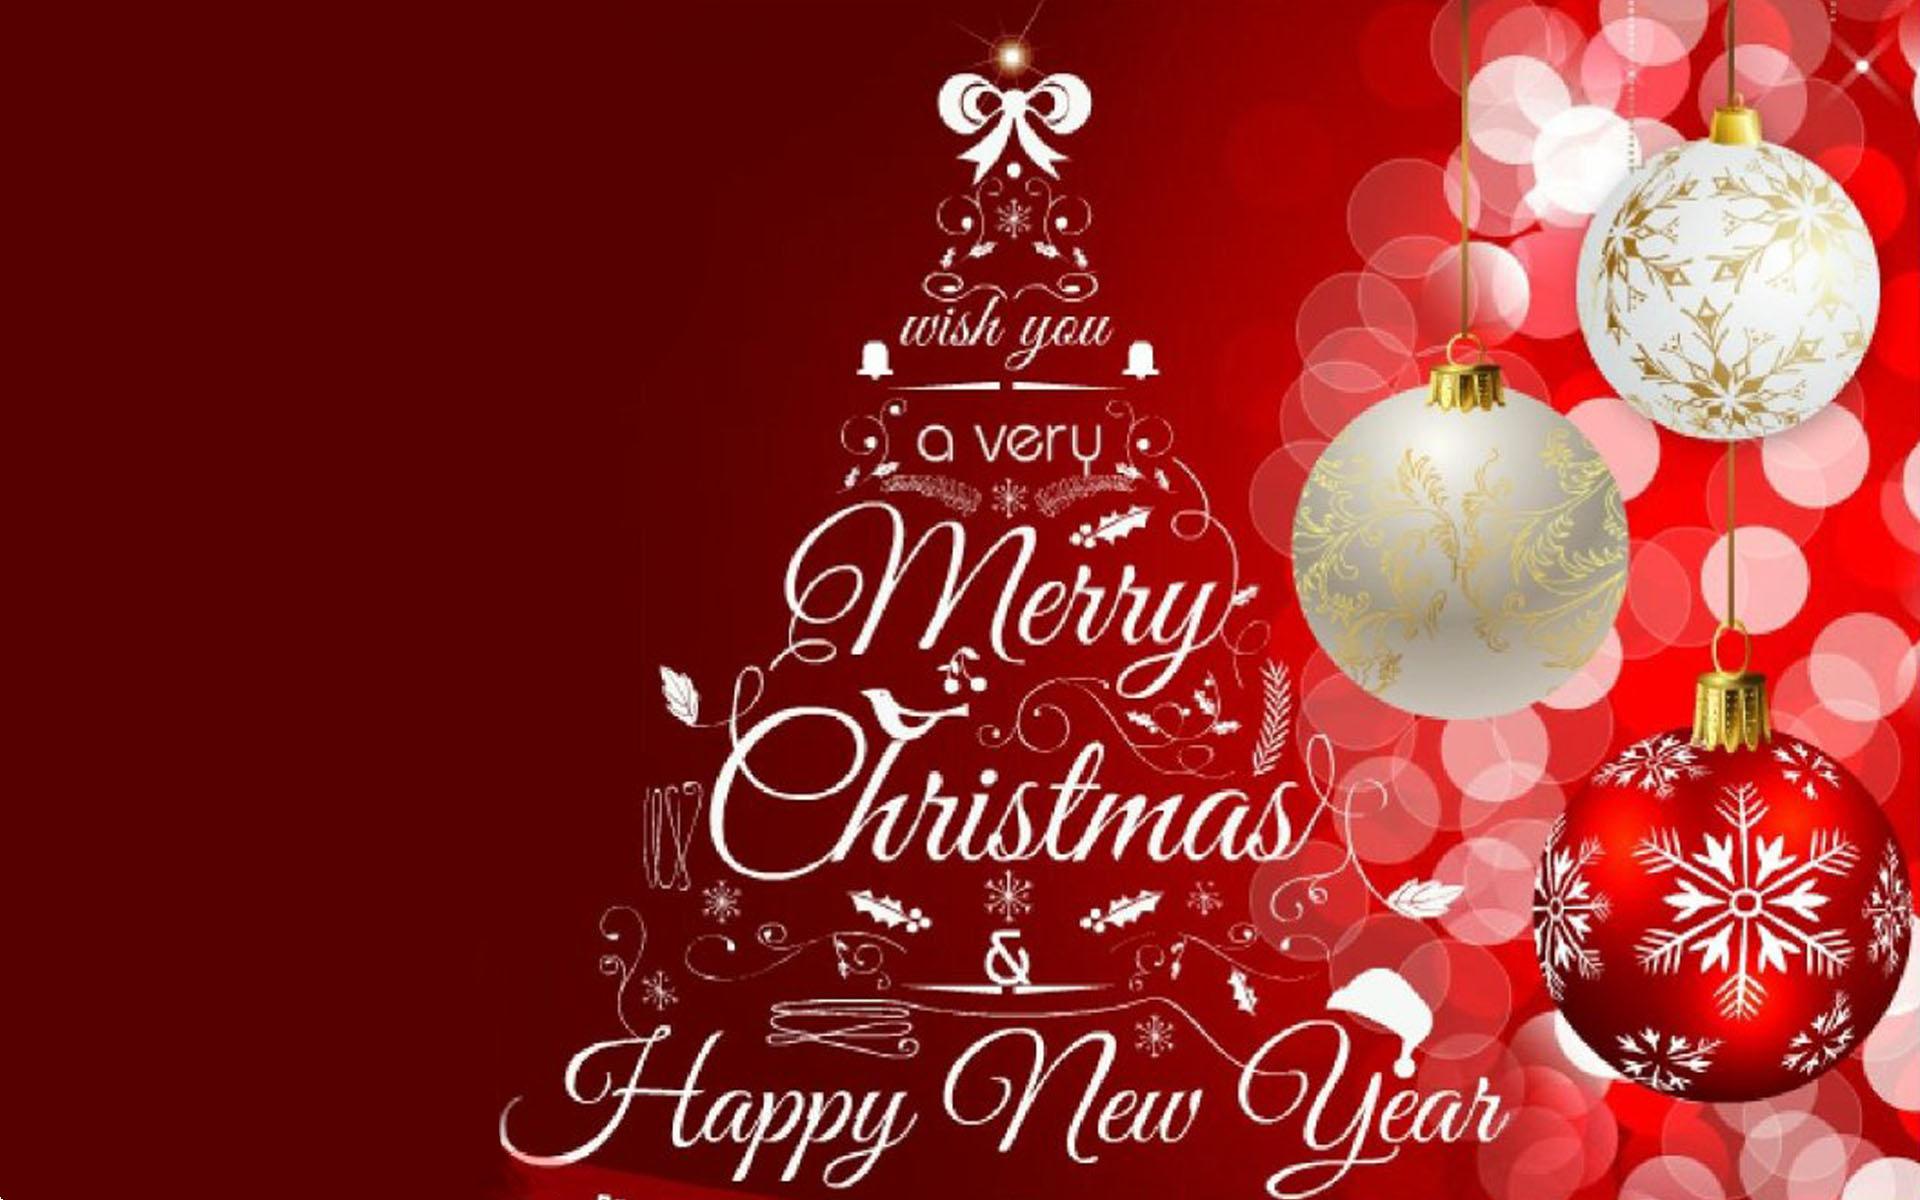 Merry Christmas And Happy New Year 2020 Wallpapers Wallpaper Cave